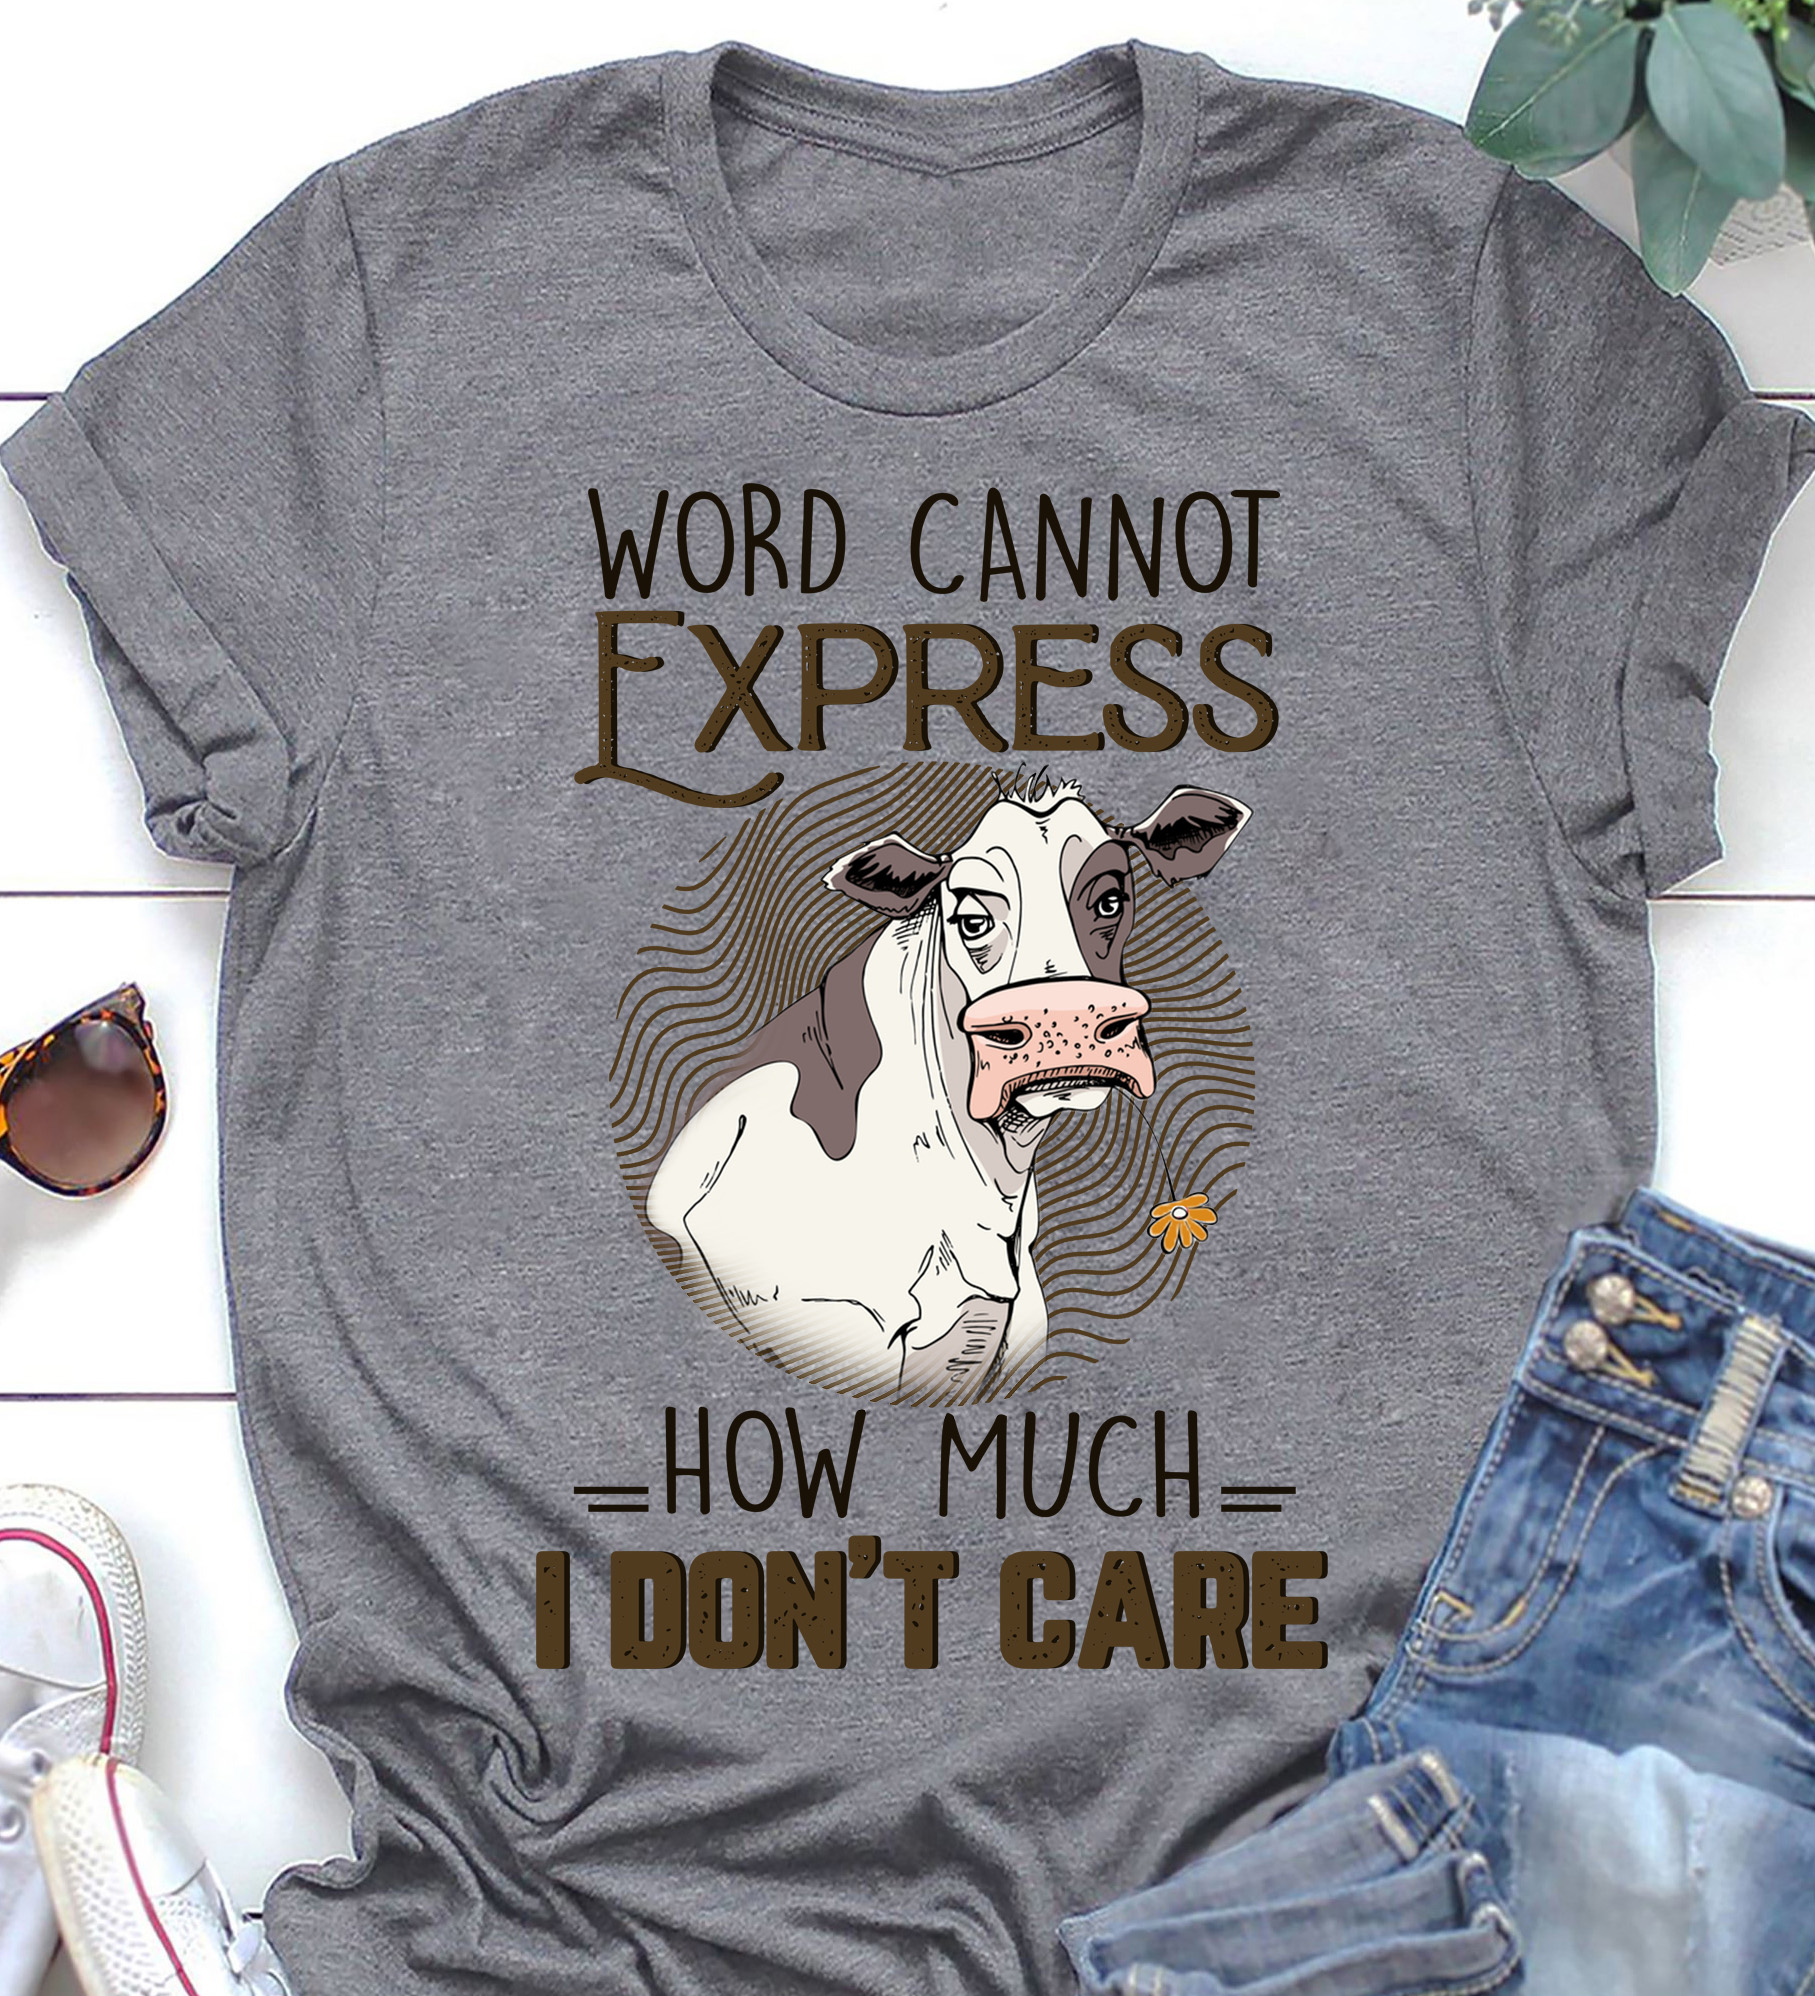 Word can not express how much I don't care - Don't care cow